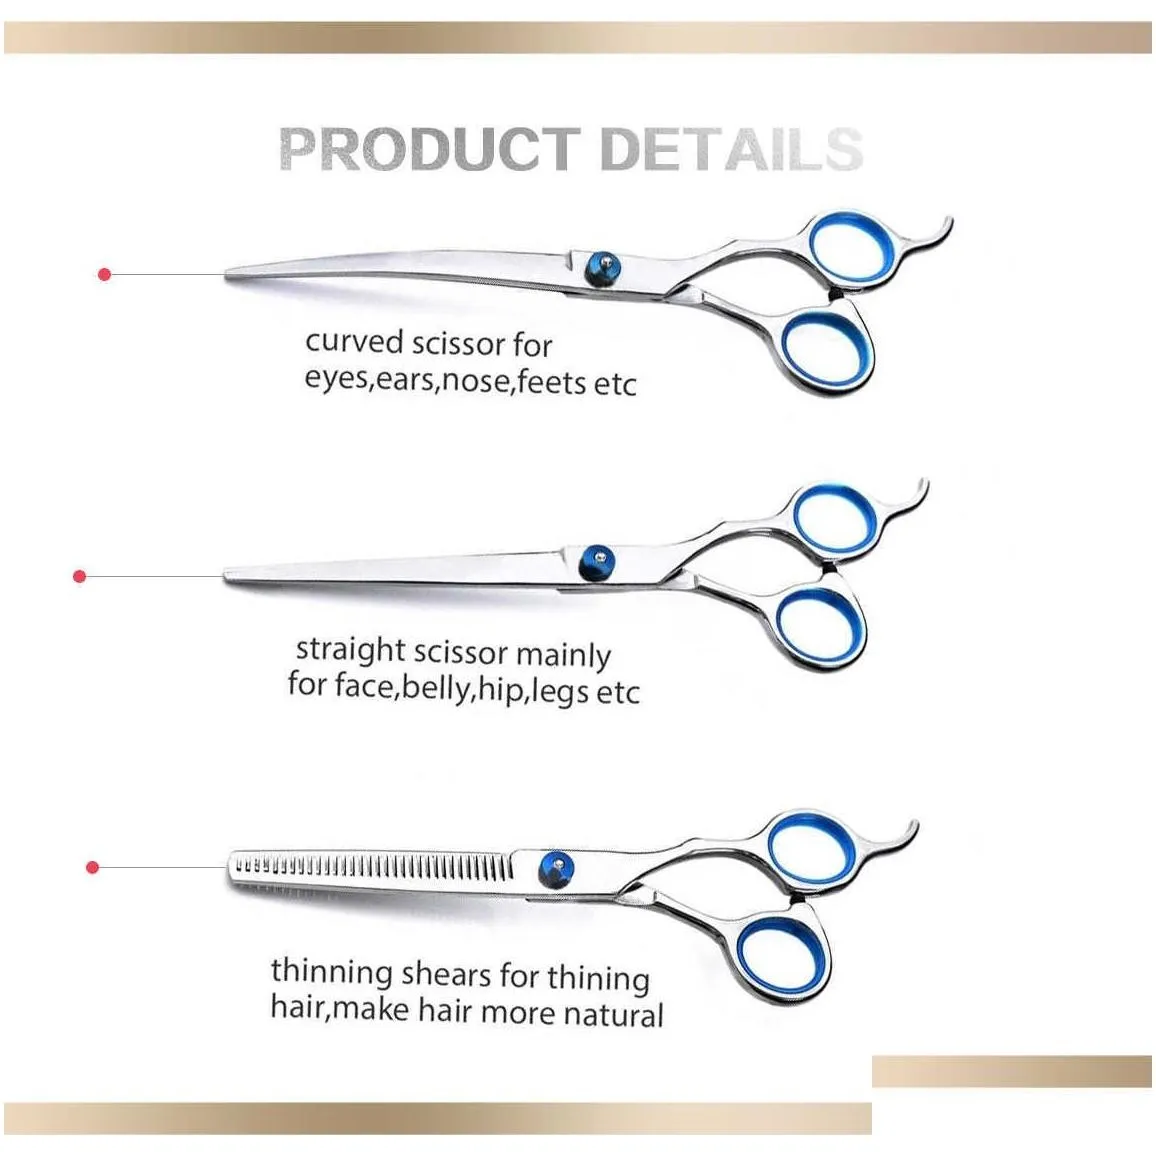 new 5pcs/set stainless steel pet dogs grooming scissors suit hairdresser scissors for dogs professional animal barber cutting tools